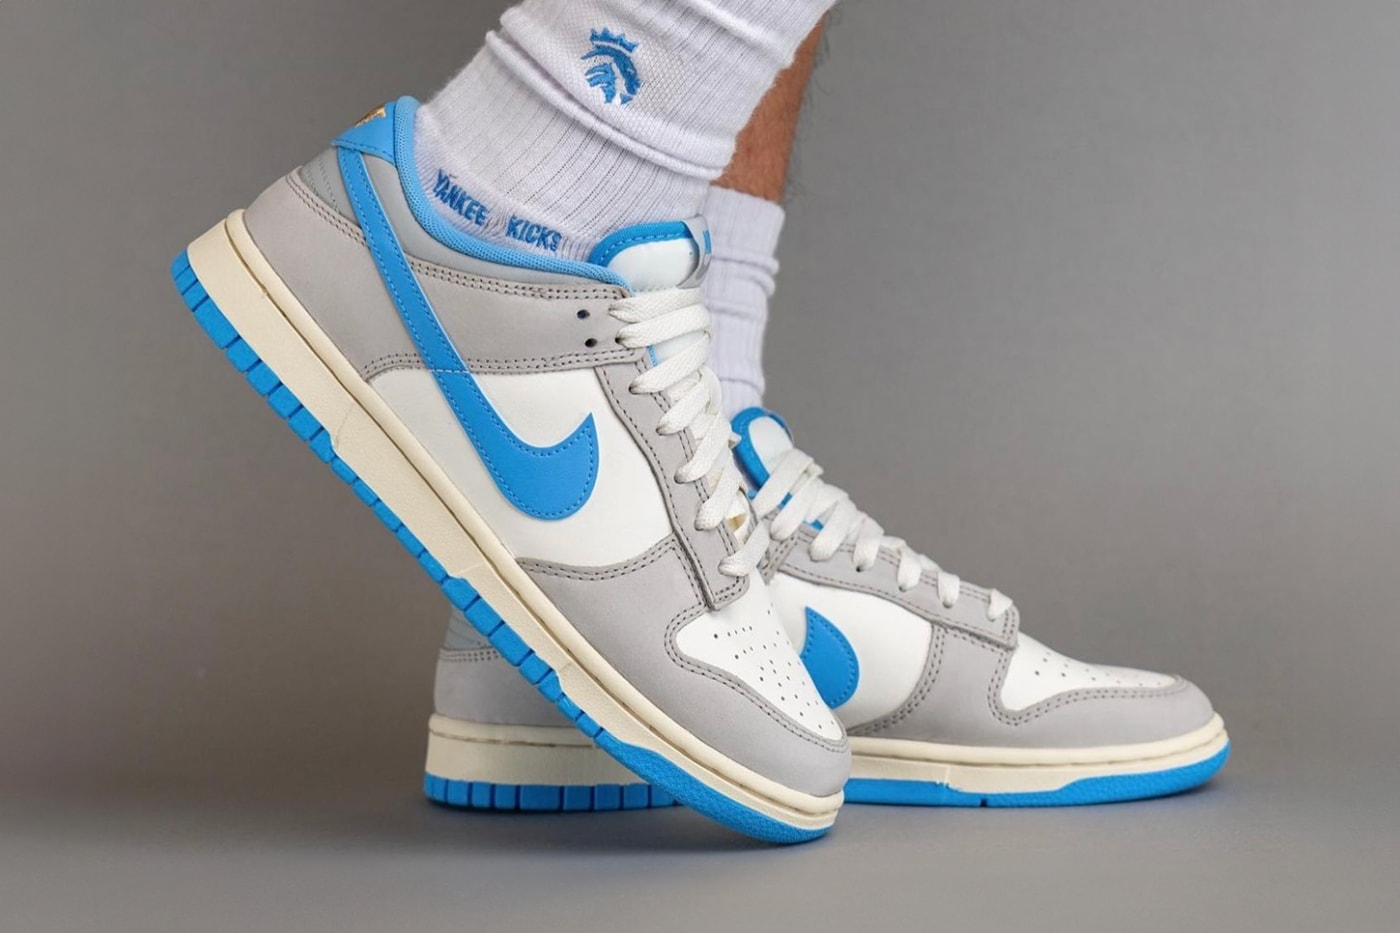 On-Feet Look at the Nike Dunk Low "Athletic Department" FN7488-133 Sail/University Blue-Light Iron Ore-Light Smoke Grey-Coconut Milk sneakers swoosh low top university blue